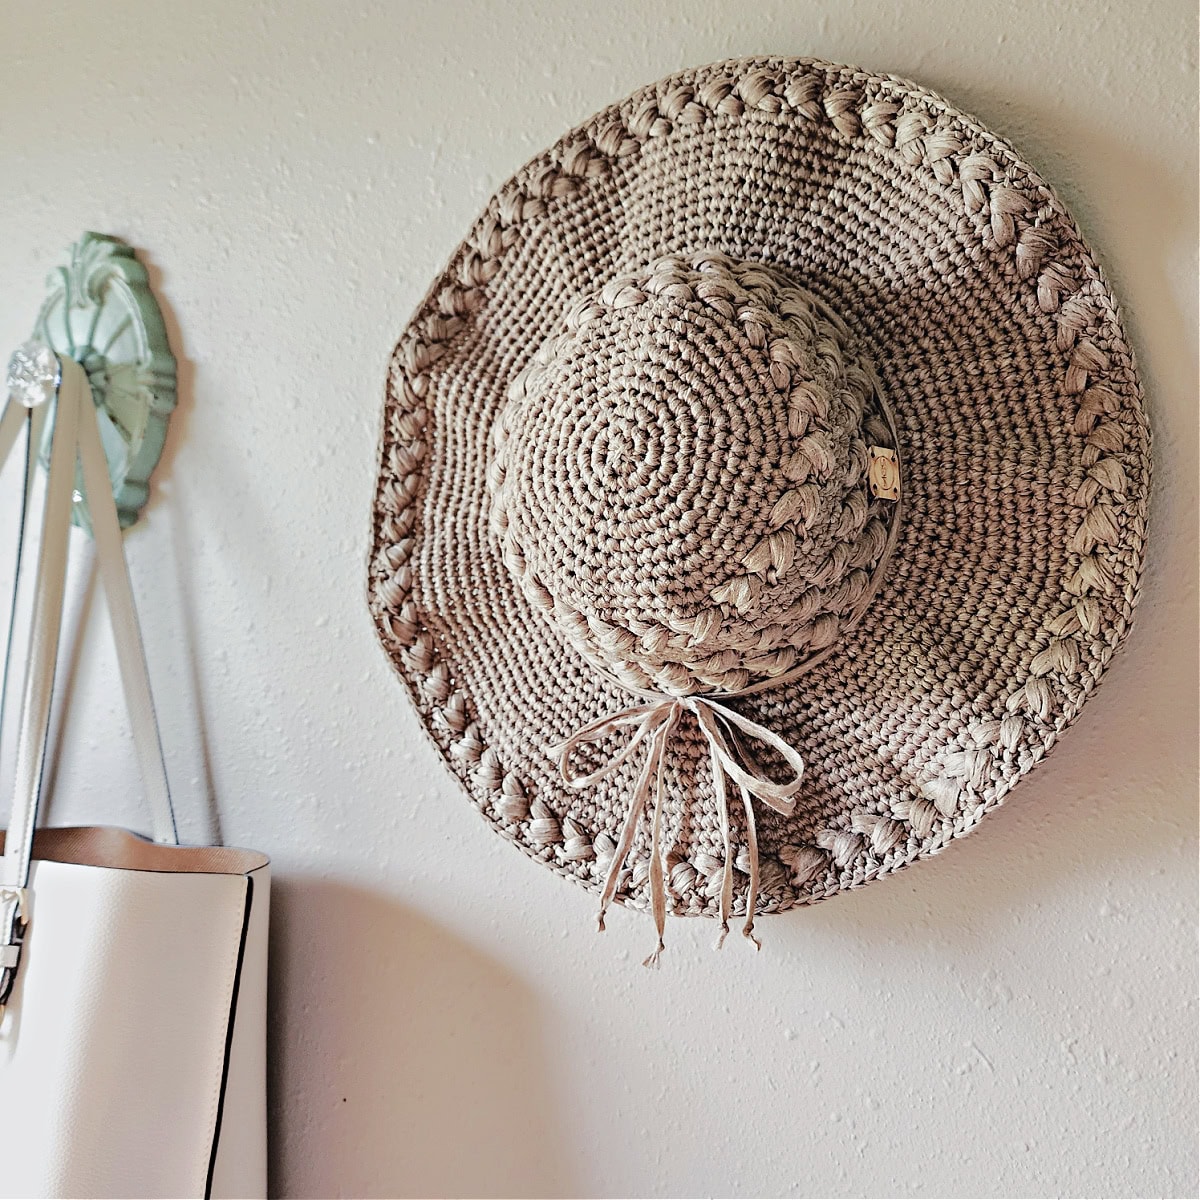 A beige crochet sun hat with a wide brim hanging on a hook on the wall.